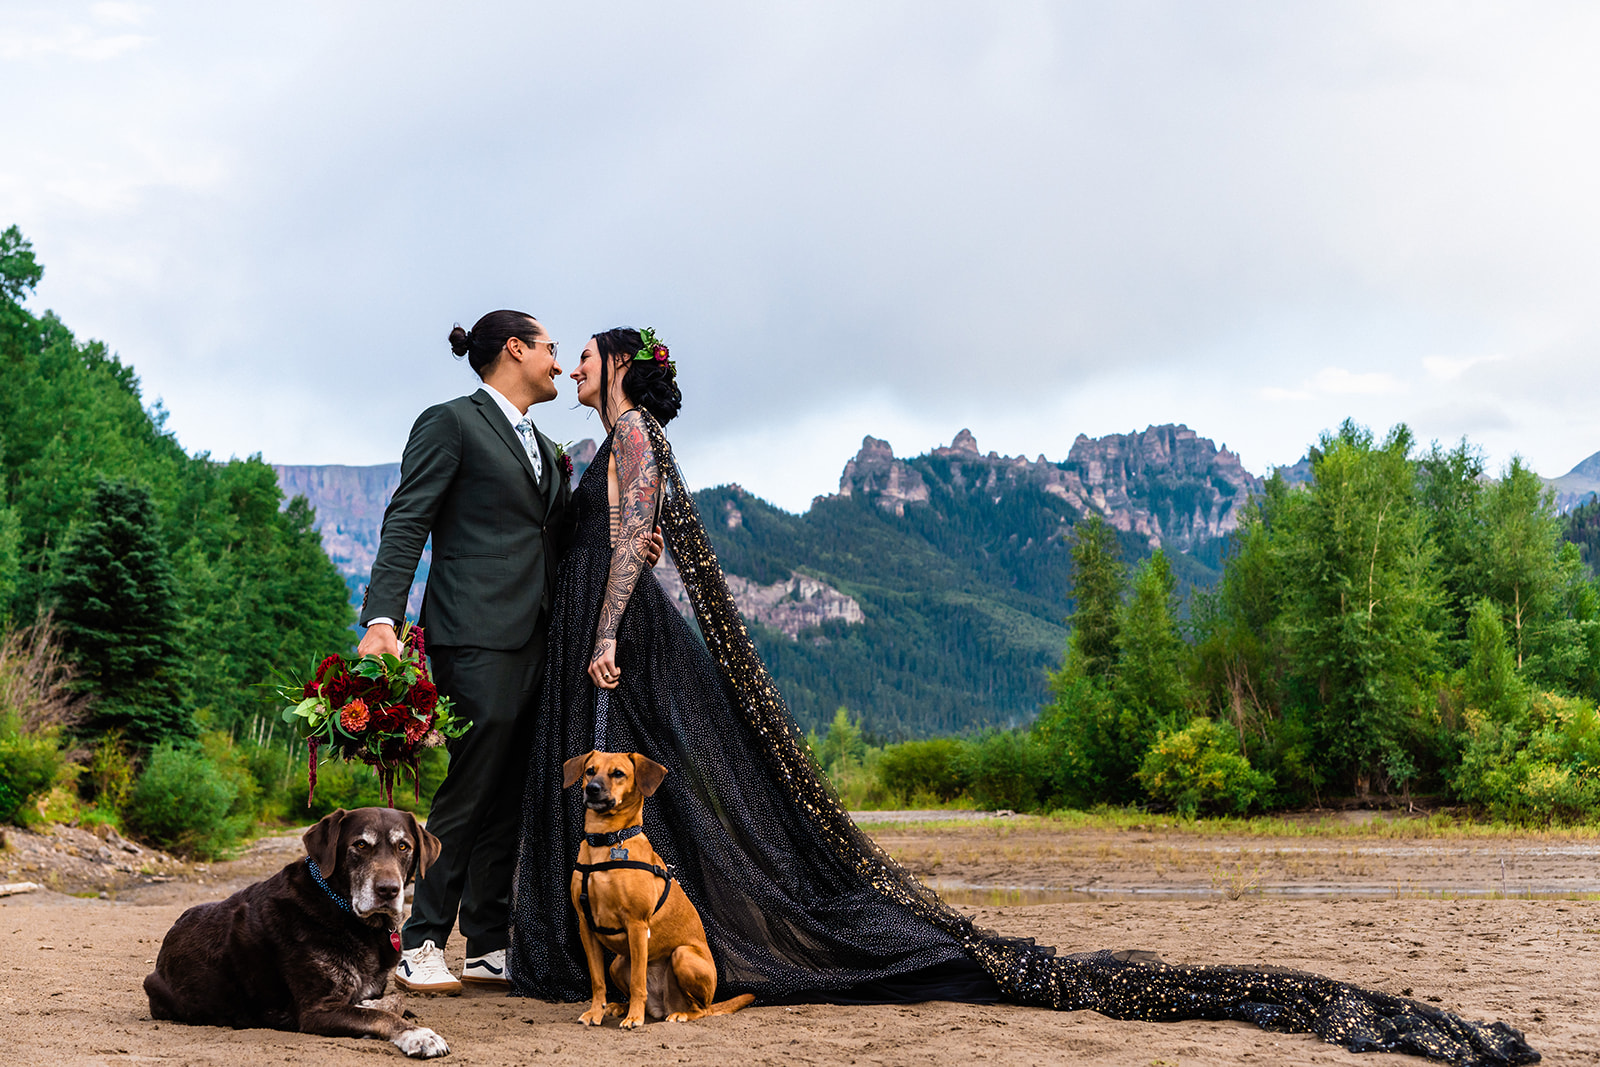 Bride and groom smiling at one another next to their dogs